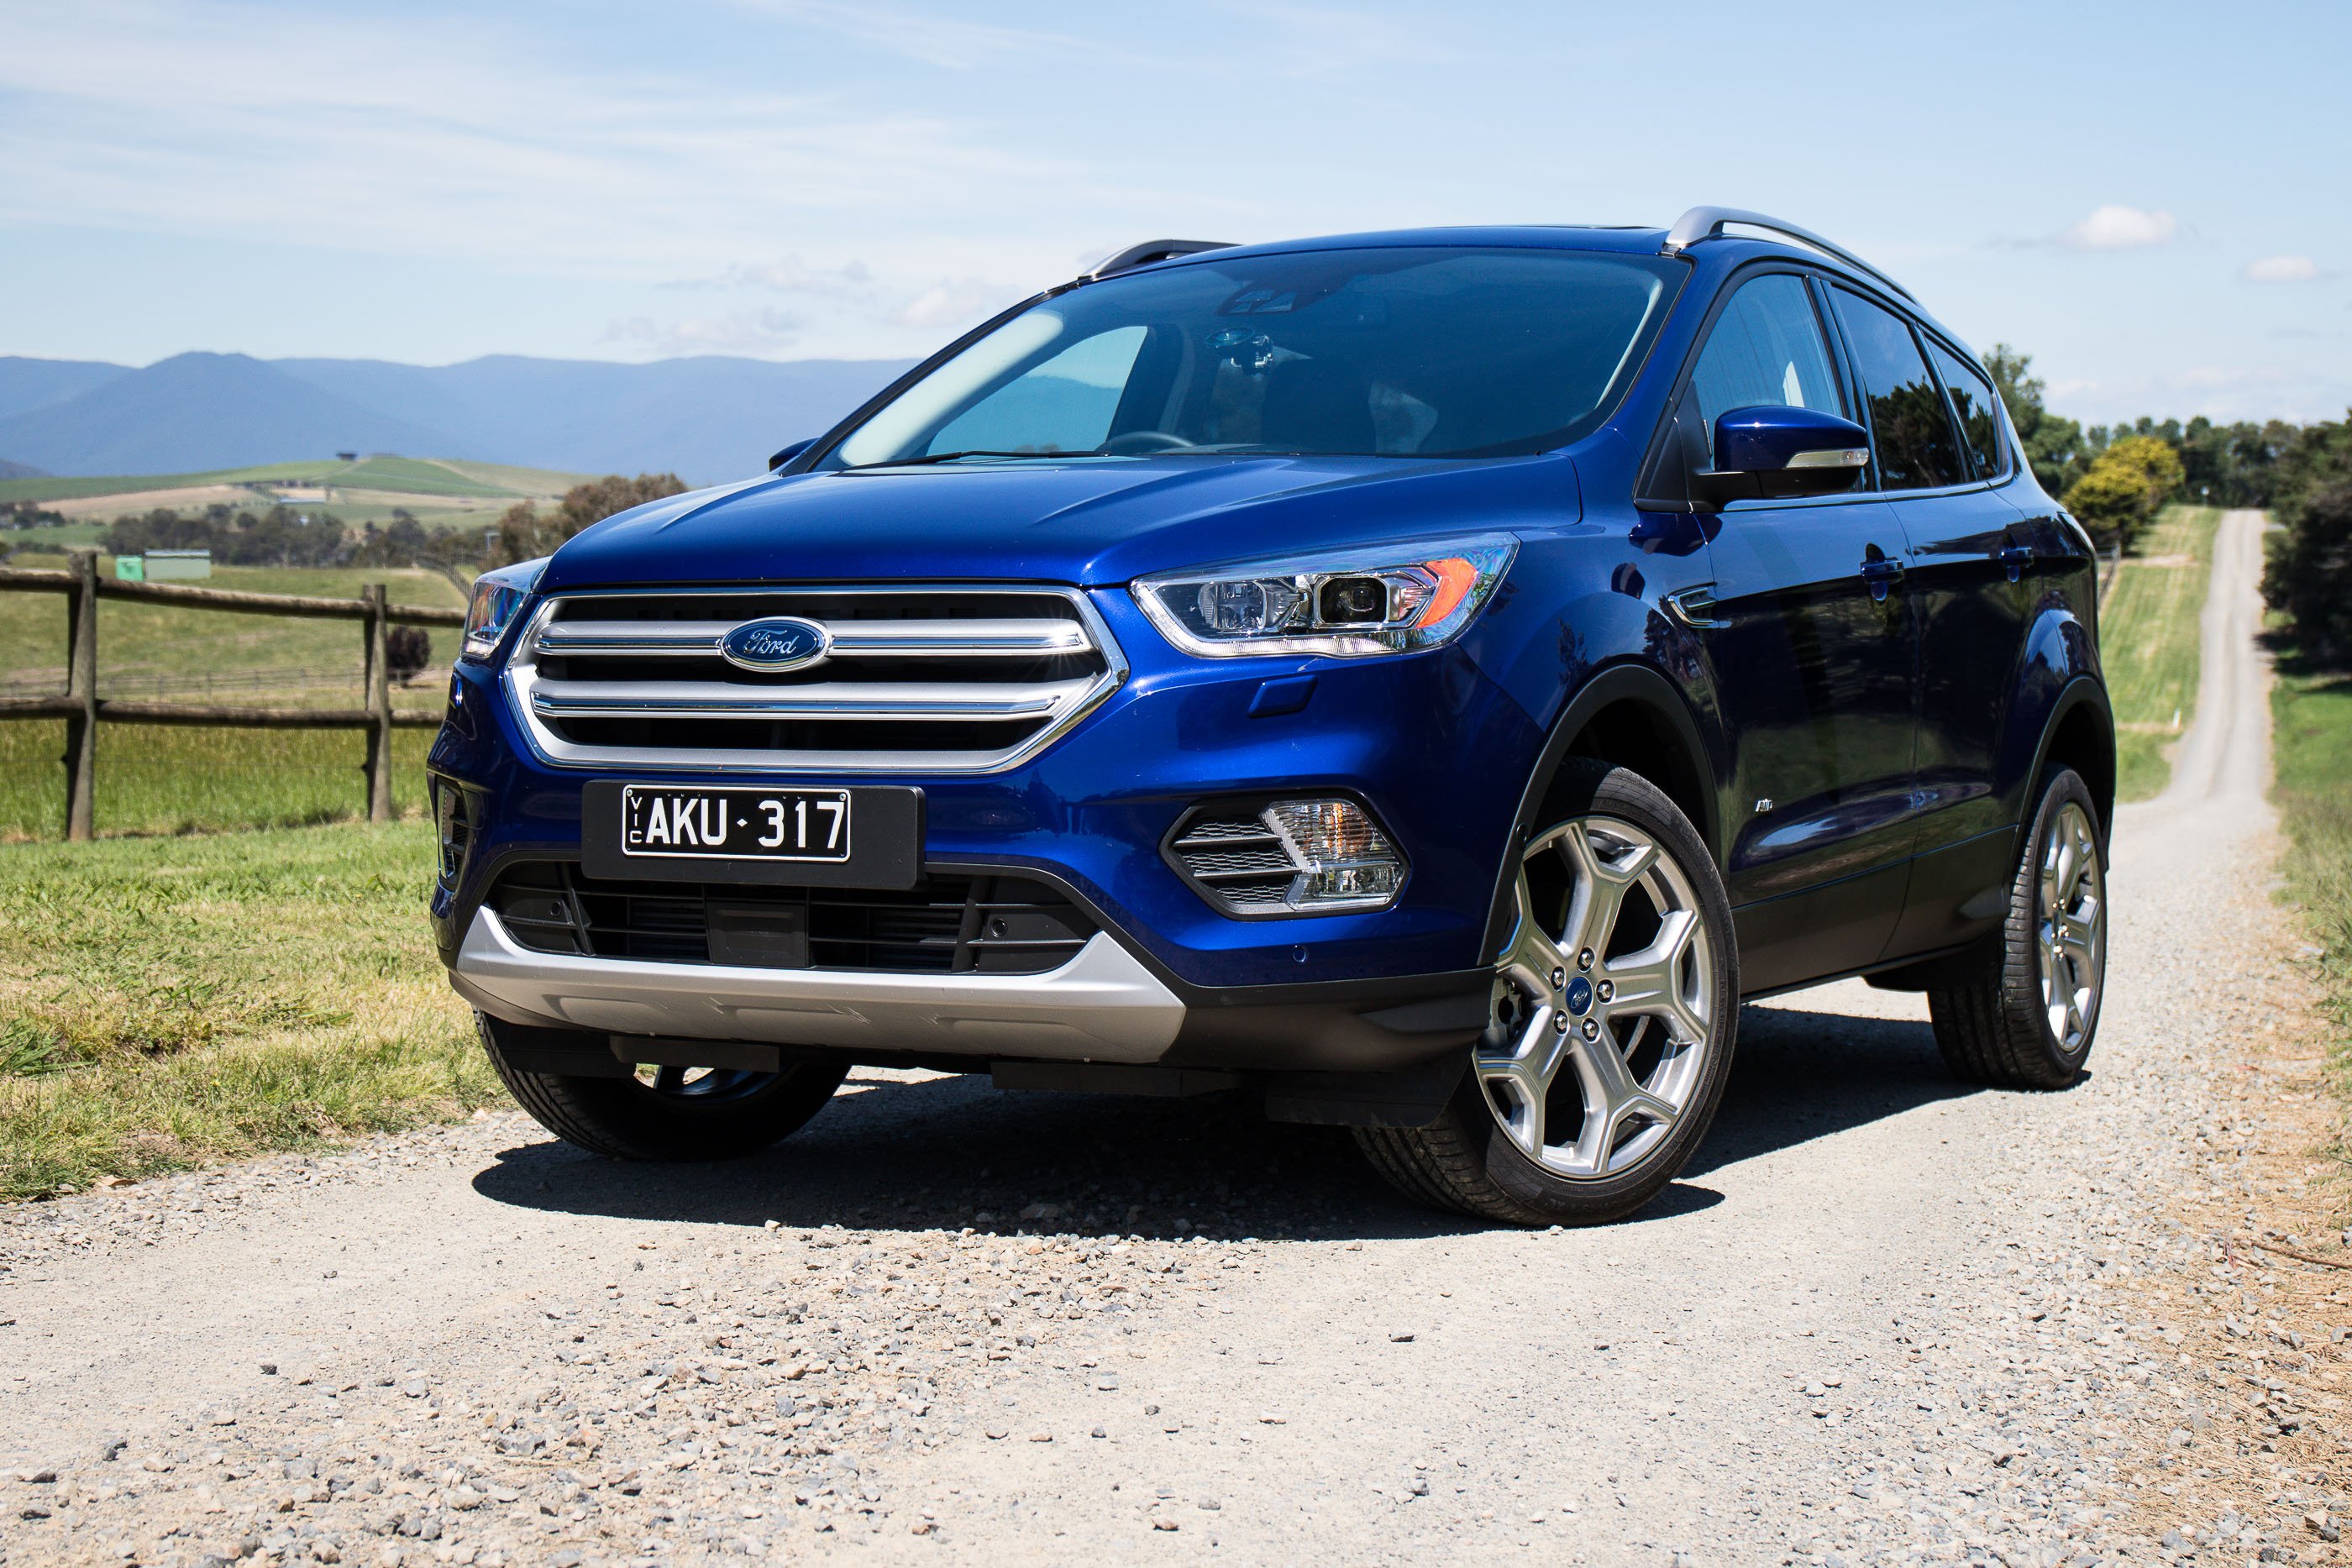 2017 Ford Escape review: Quick drive - photos | CarAdvice